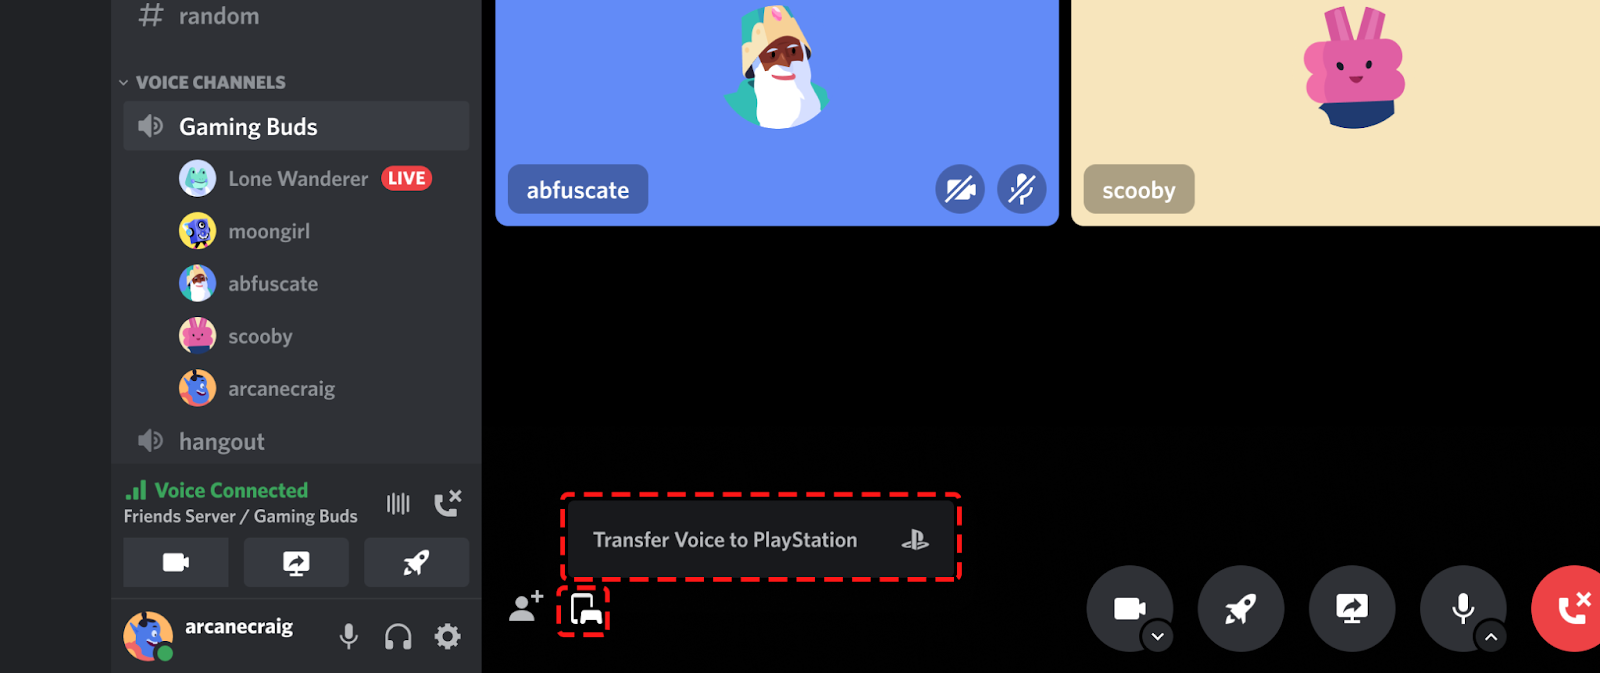 PlayStation® x Discord: Connect Your Account and Show What You're